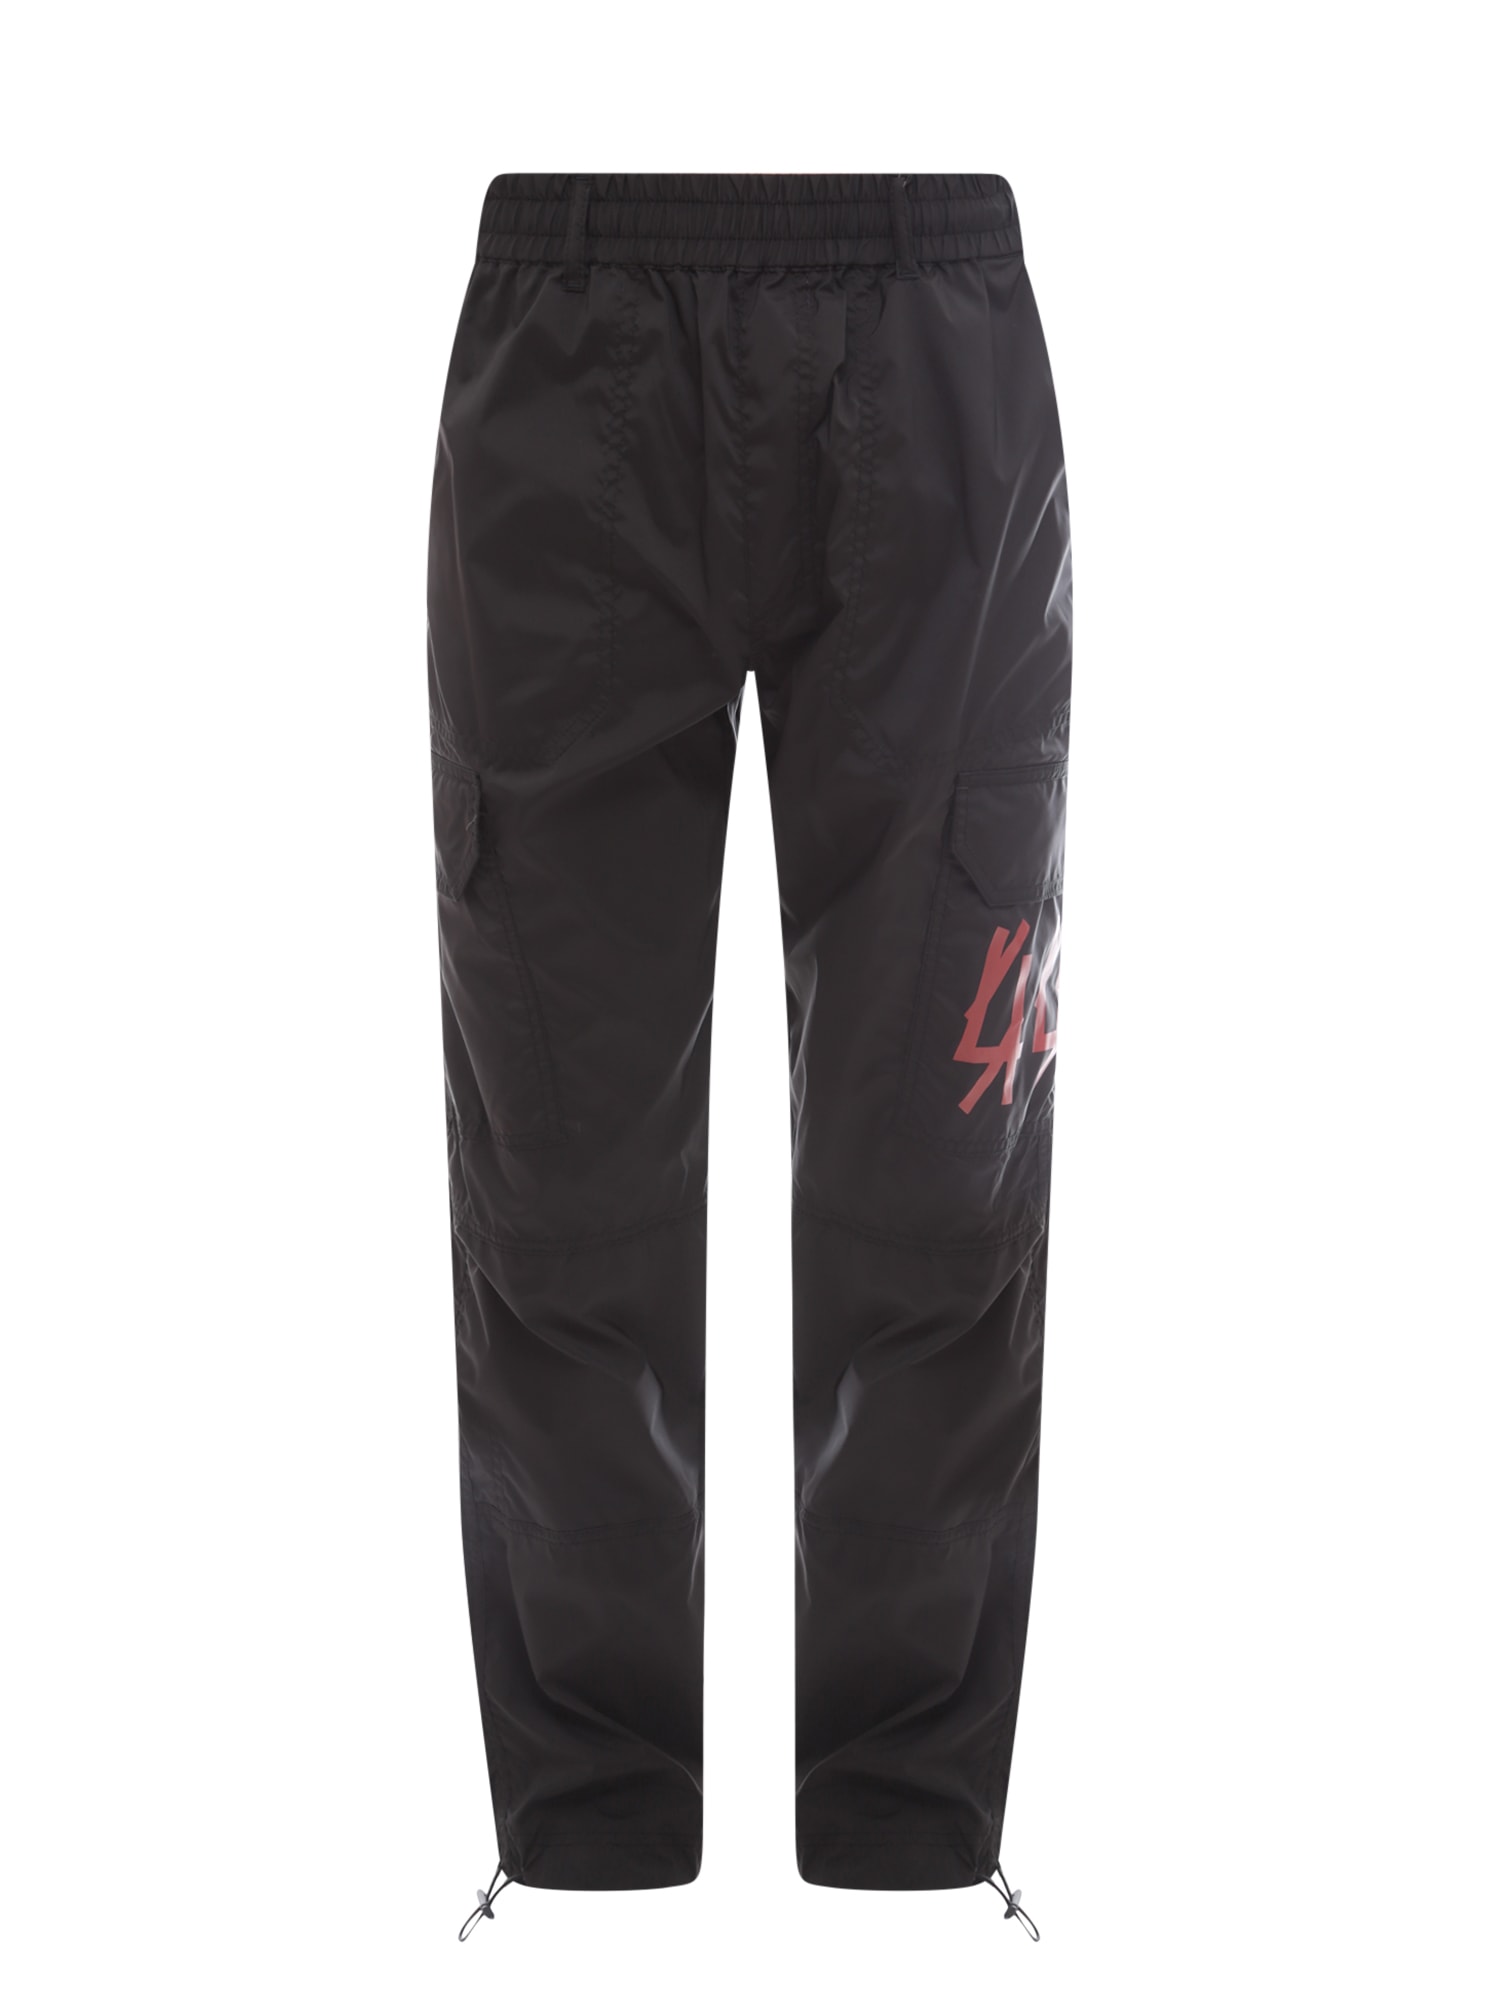 44 Label Group Trouser